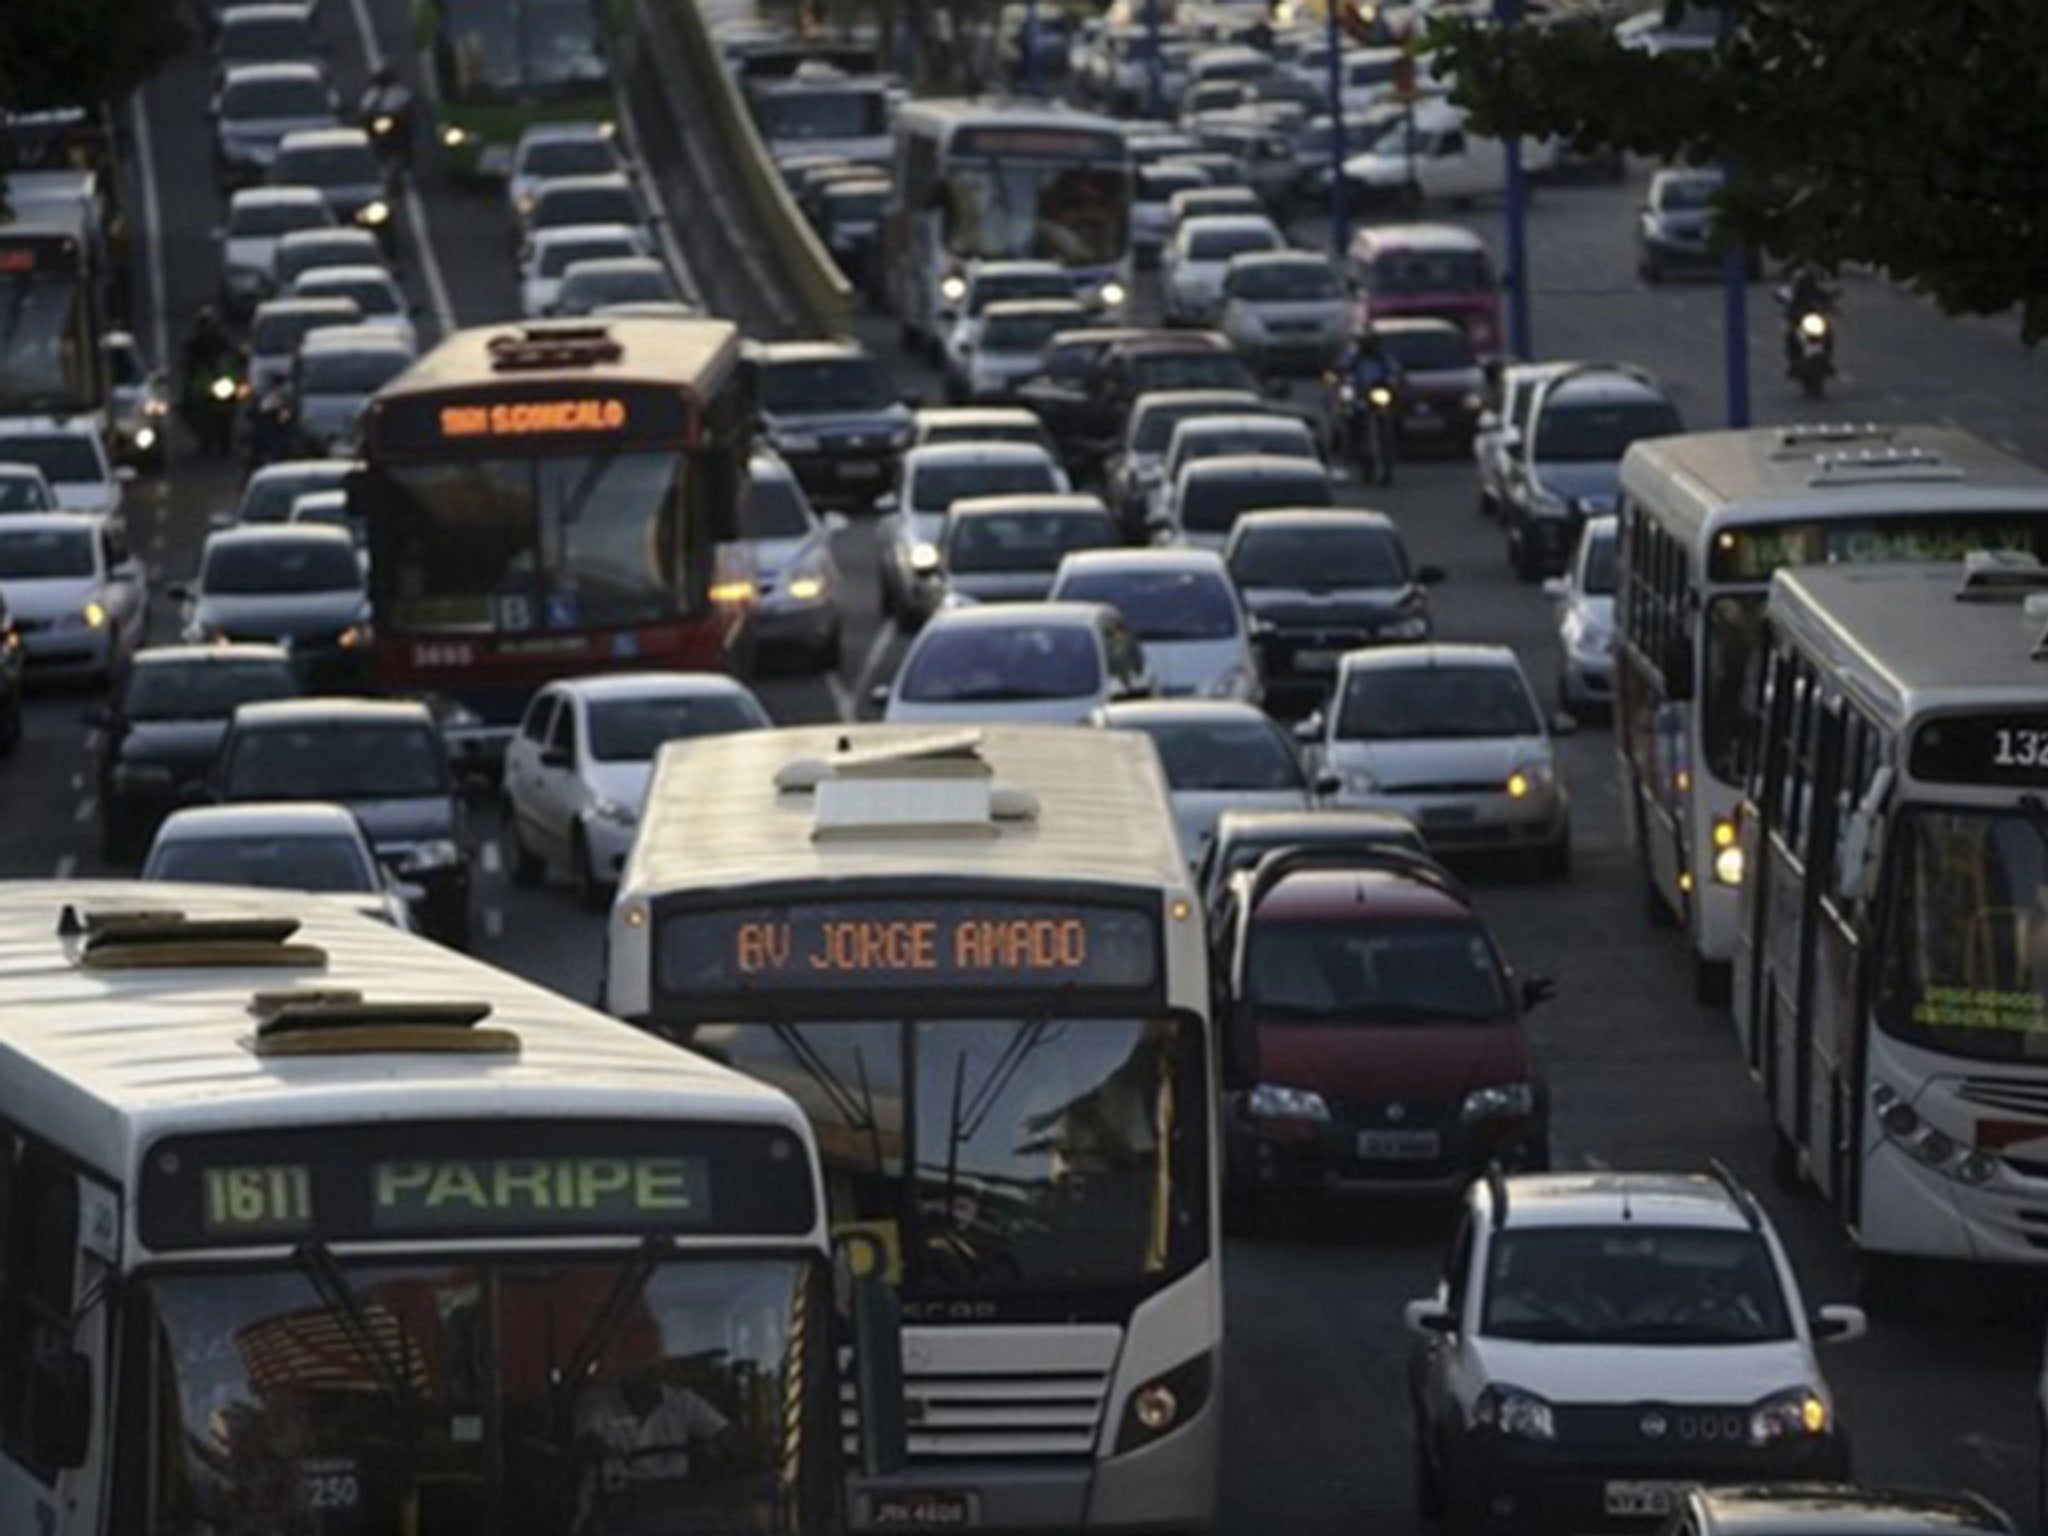 A view of a traffic jam during a weekday rush hour in March 2014 along Tancredo Neves Avenue, one of the main arteries of Salvador, Brazil. (Lunae Parracho/Reuters)